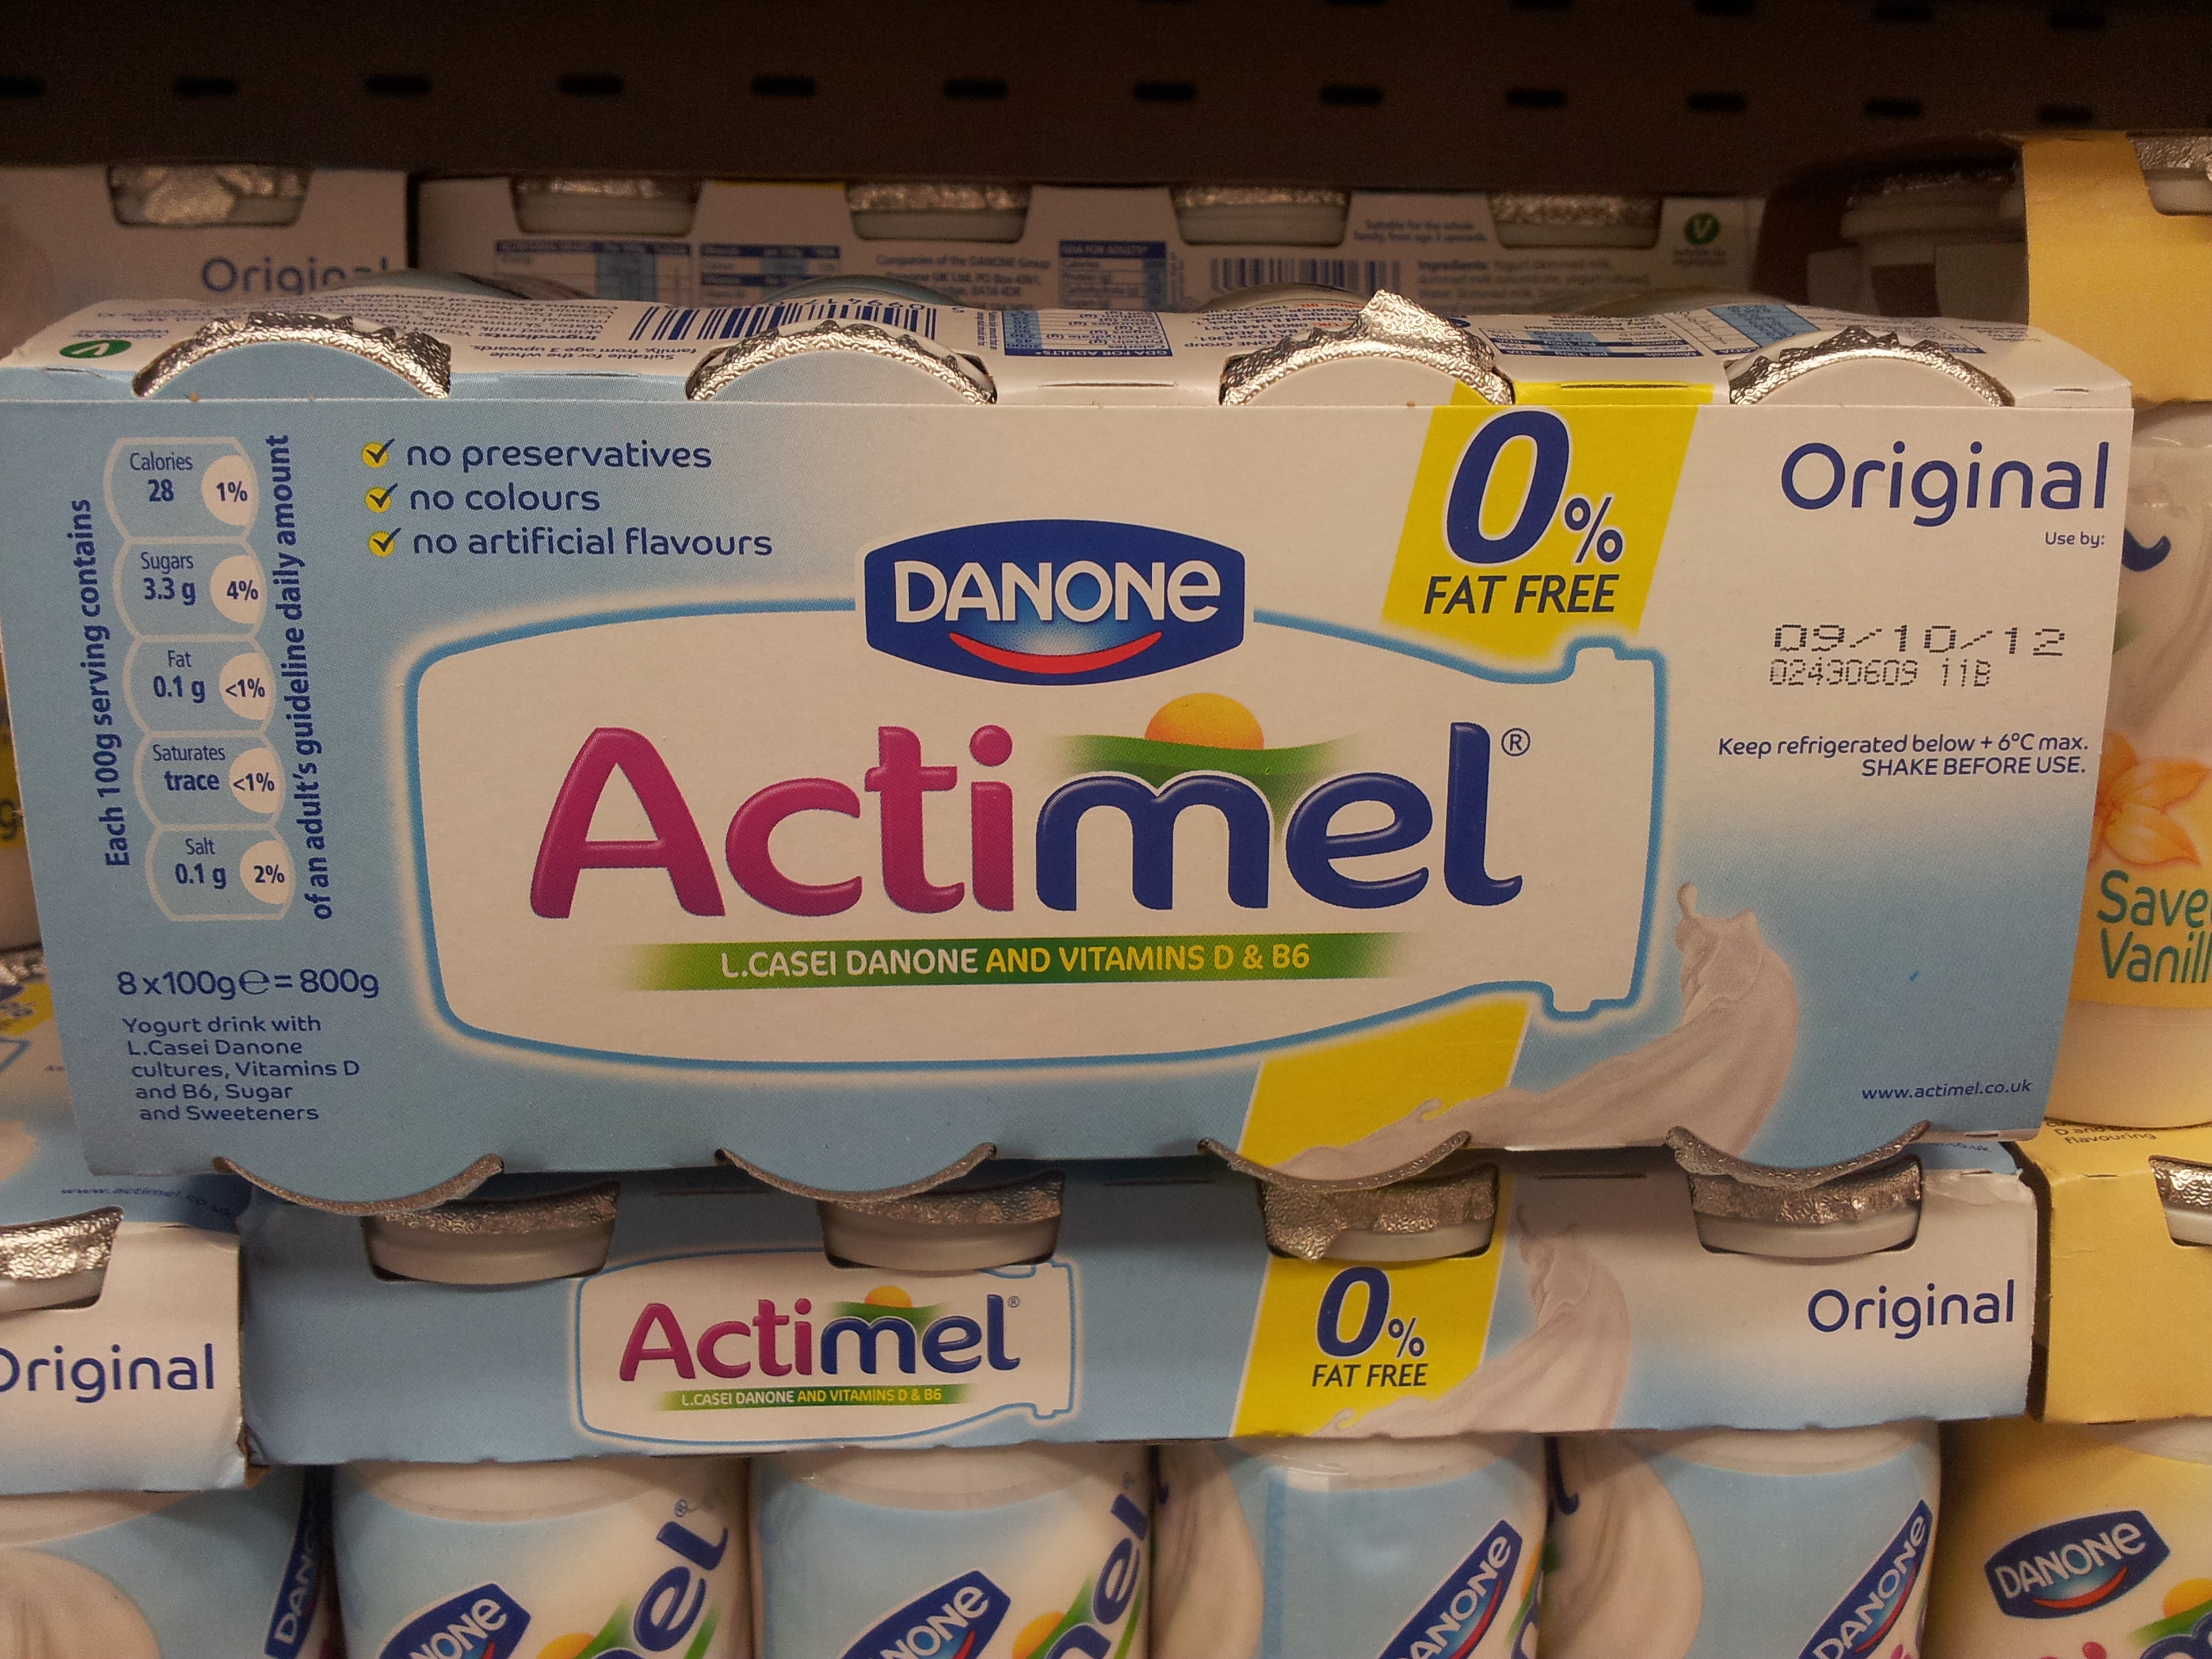 Actimel launches new immune system-boosting range, News